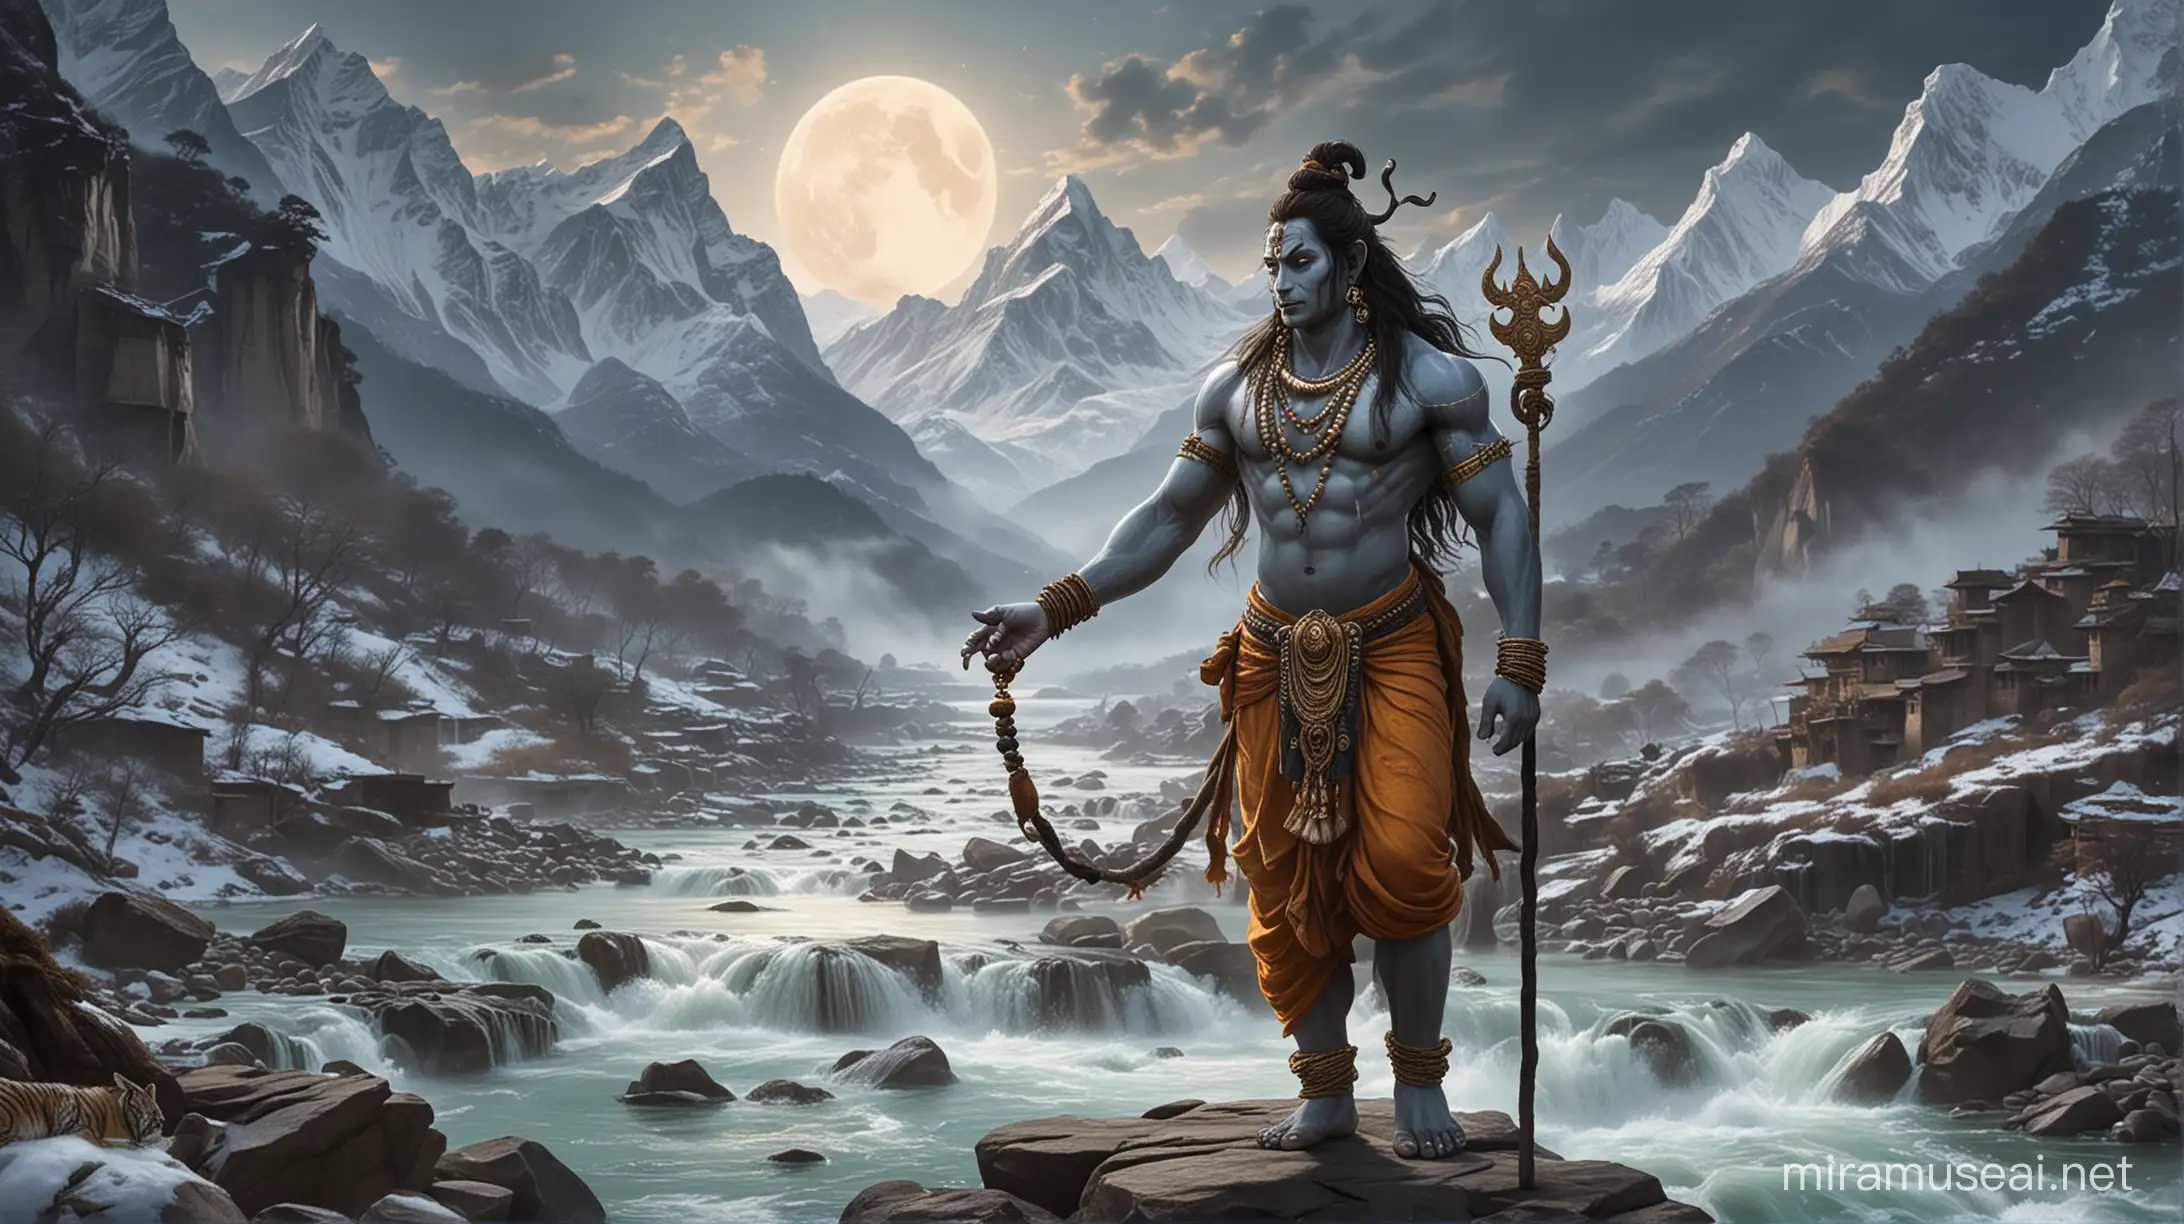 
Lord Shiva's hair, matted and flowing, is adorned with the crescent moon and the Ganges River cascading from it. He wears a tiger skin loincloth, and his neck is adorned with a serpent. such as the trishula (trident), damaru (drum), and a sacred mala (prayer beads).

Lord Shiva standing  on one leg with the other foot resting on the back of a demon symbolizing ignorance and negativity. The backdrop is a sacred Himalayan landscape, with snow-capped peaks and a serene river flowing nearby. The overall image radiates an aura of divine power, tranquility, and spiritual depth.